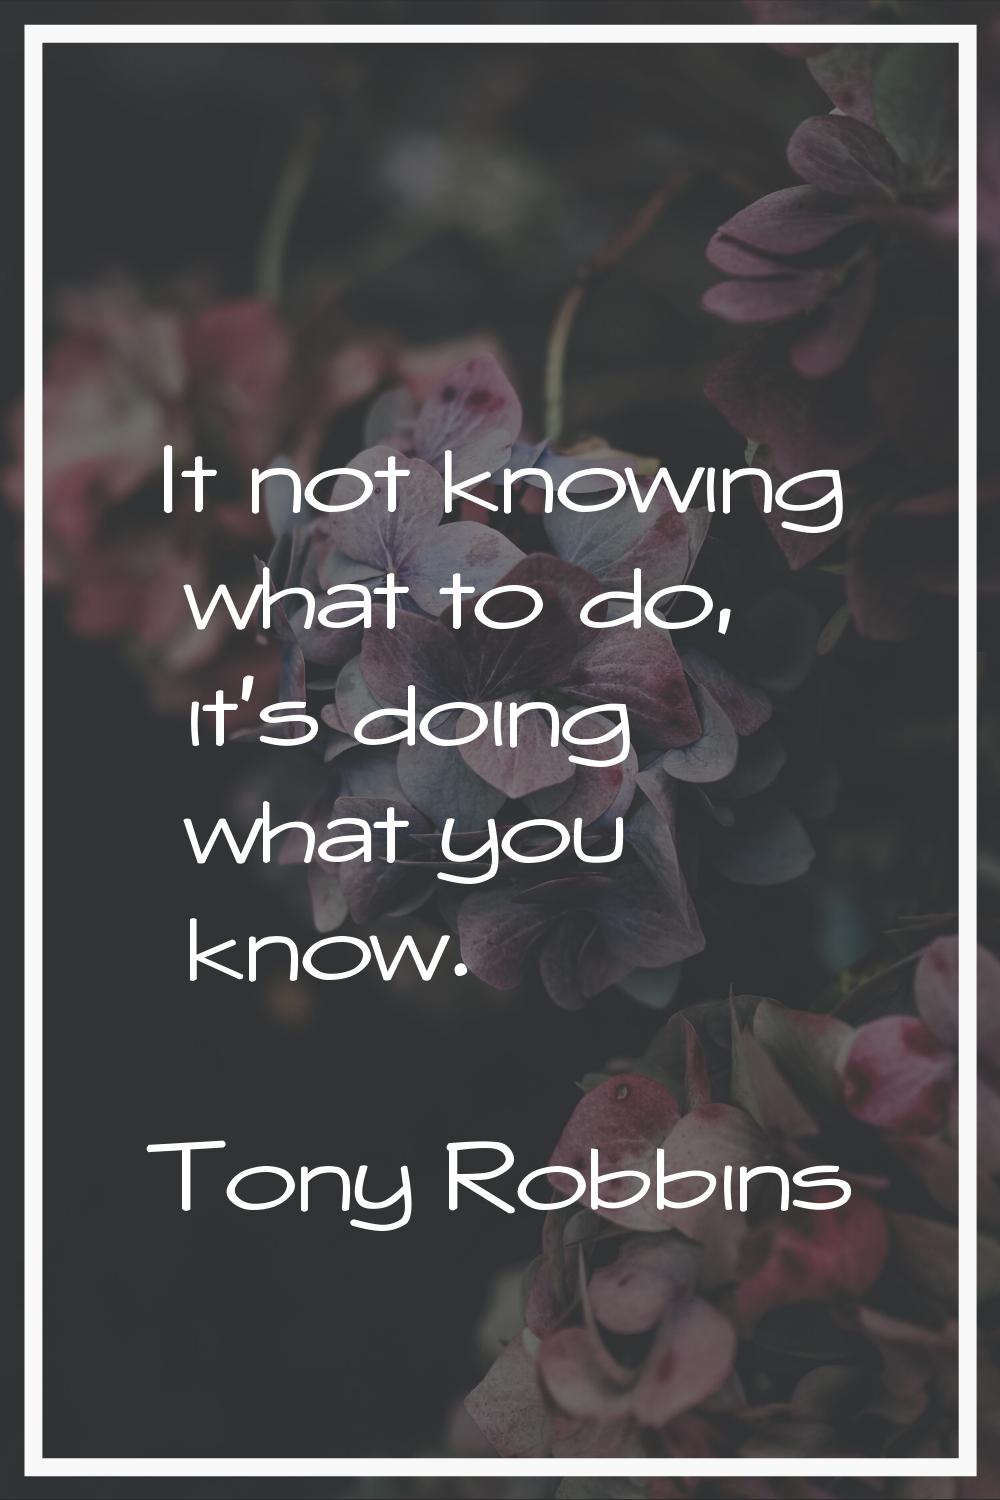 It not knowing what to do, it's doing what you know.